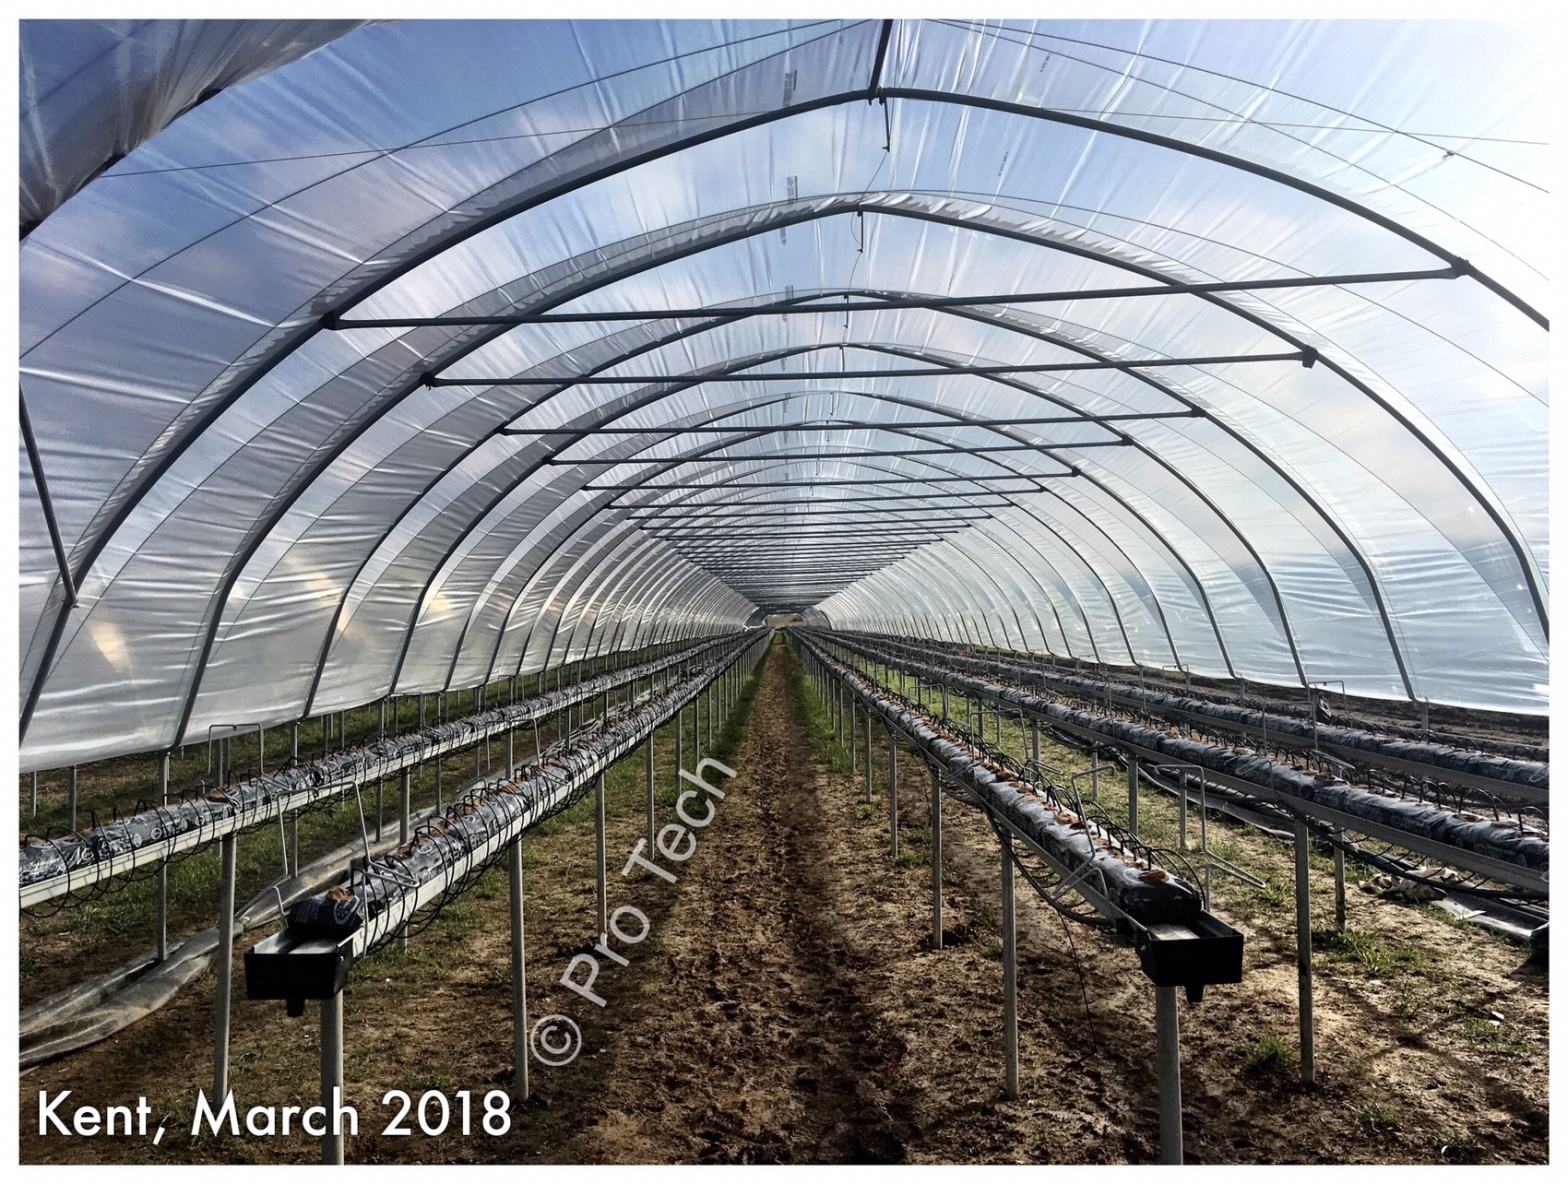 strawberry Spanish Tunnels, strawberry polytunnels, Polytunnels, strawberry, strawberry farm, Kentish strawberry, tabletops, Strawberry gutters tabletops, Agricultural polythene, Kent farming